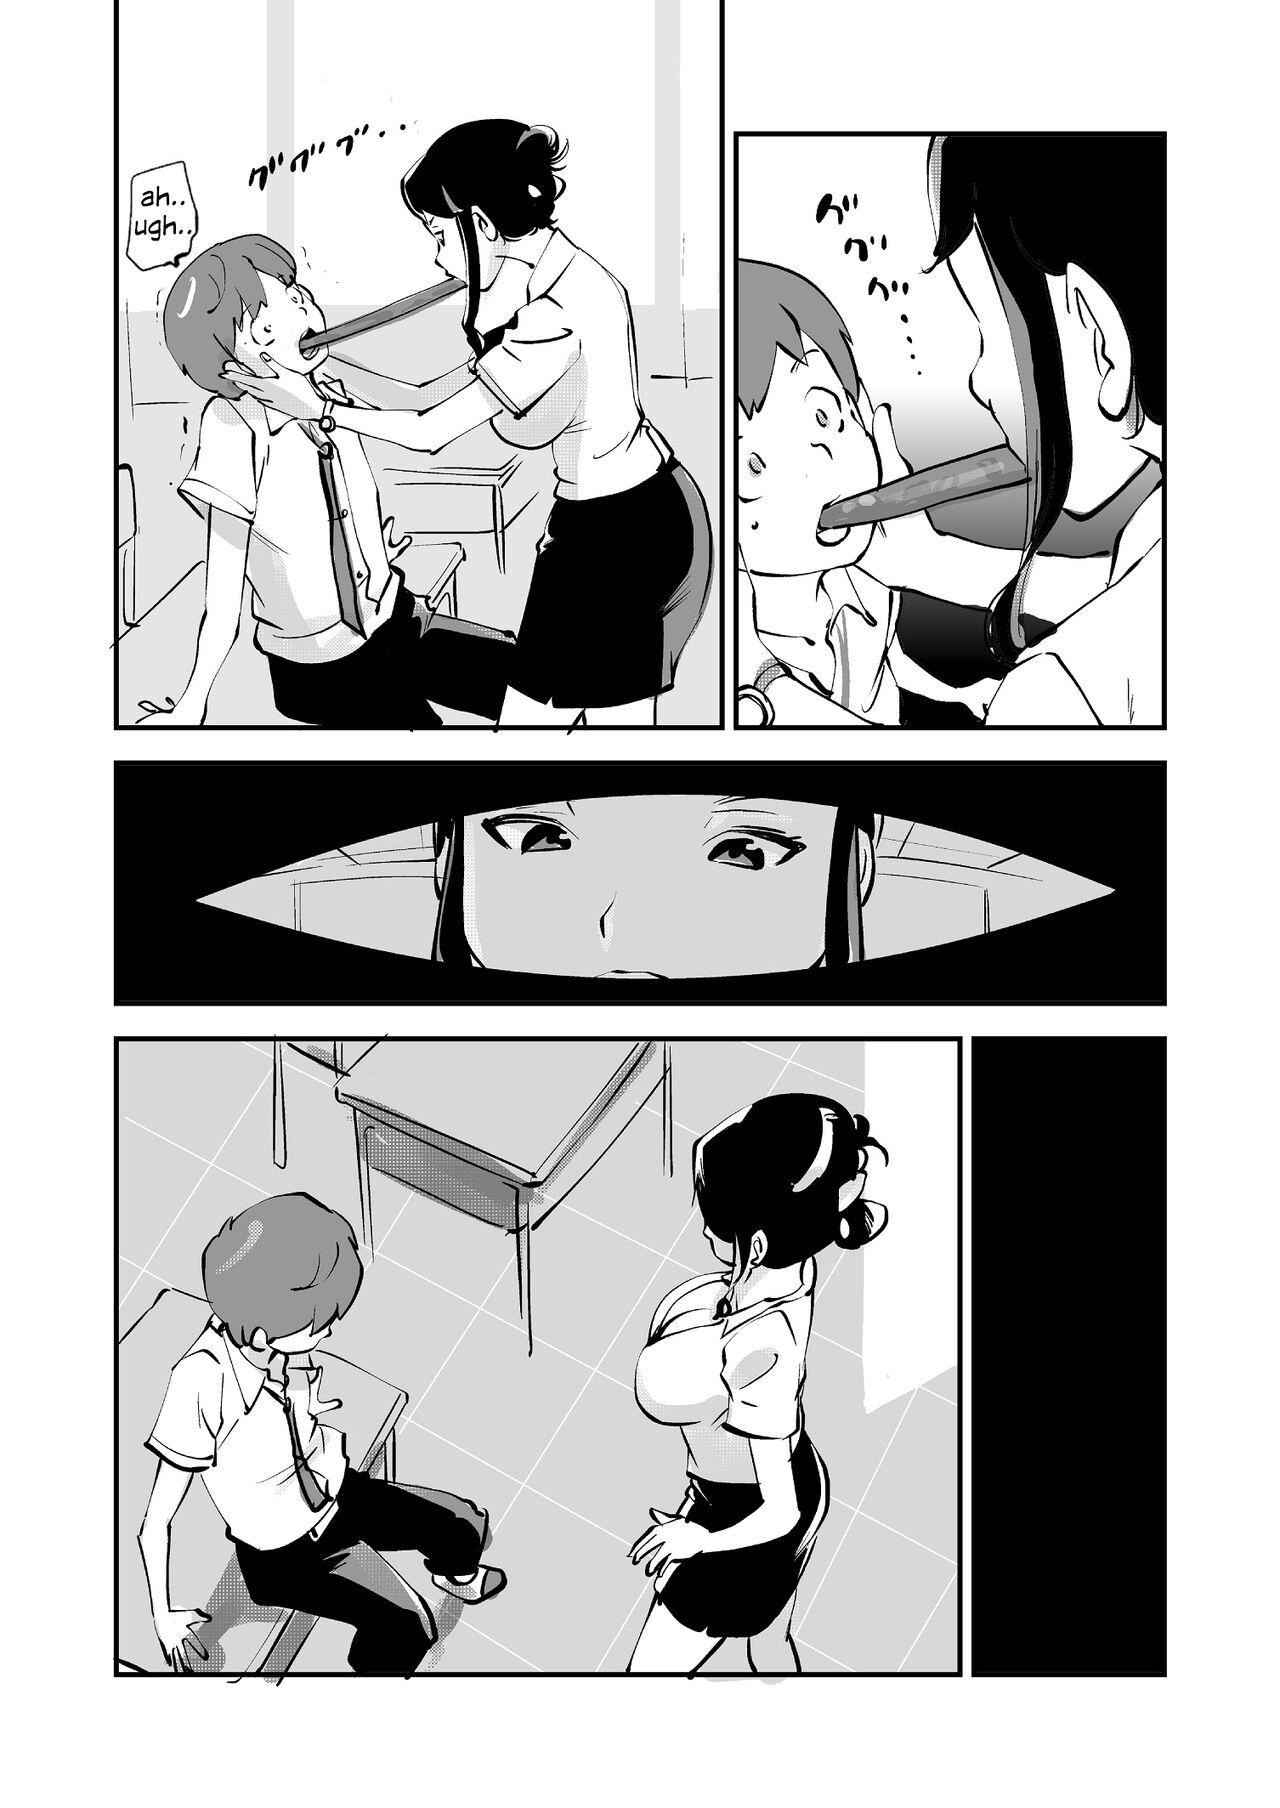 The Flesh Swapper Manga Best Blowjobs Ever - Page 4